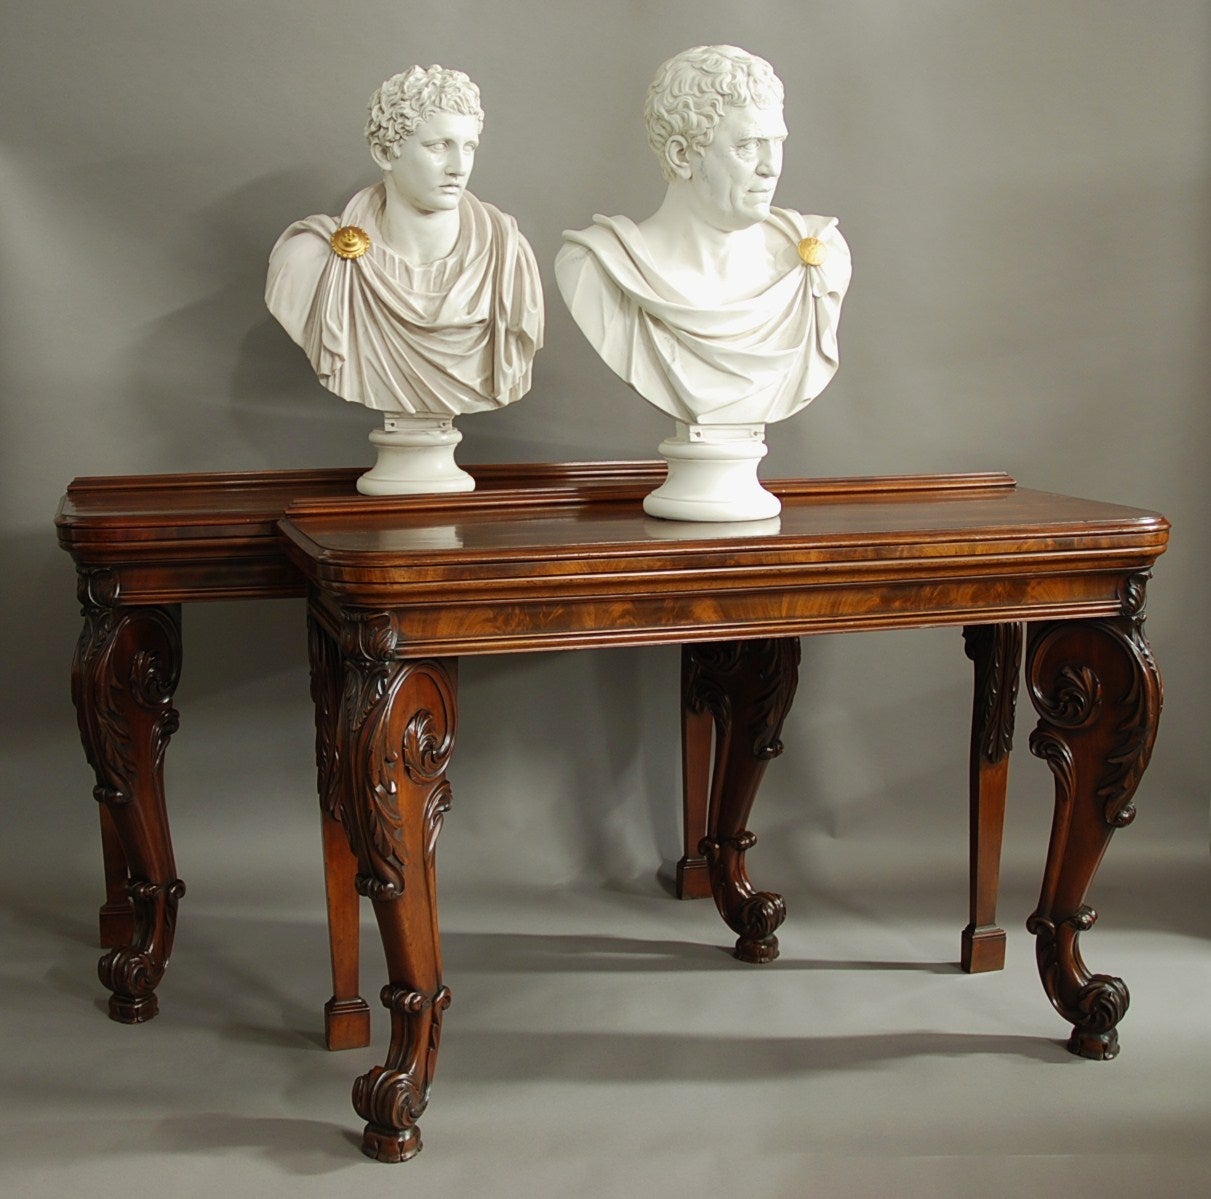 A superb pair of William IV mahogany console tables in the manner of Gillows.

These tables consist of fine quality solid mahogany tops with a low moulding to the back edge (to stop items falling from the back).

The tops have rounded corners